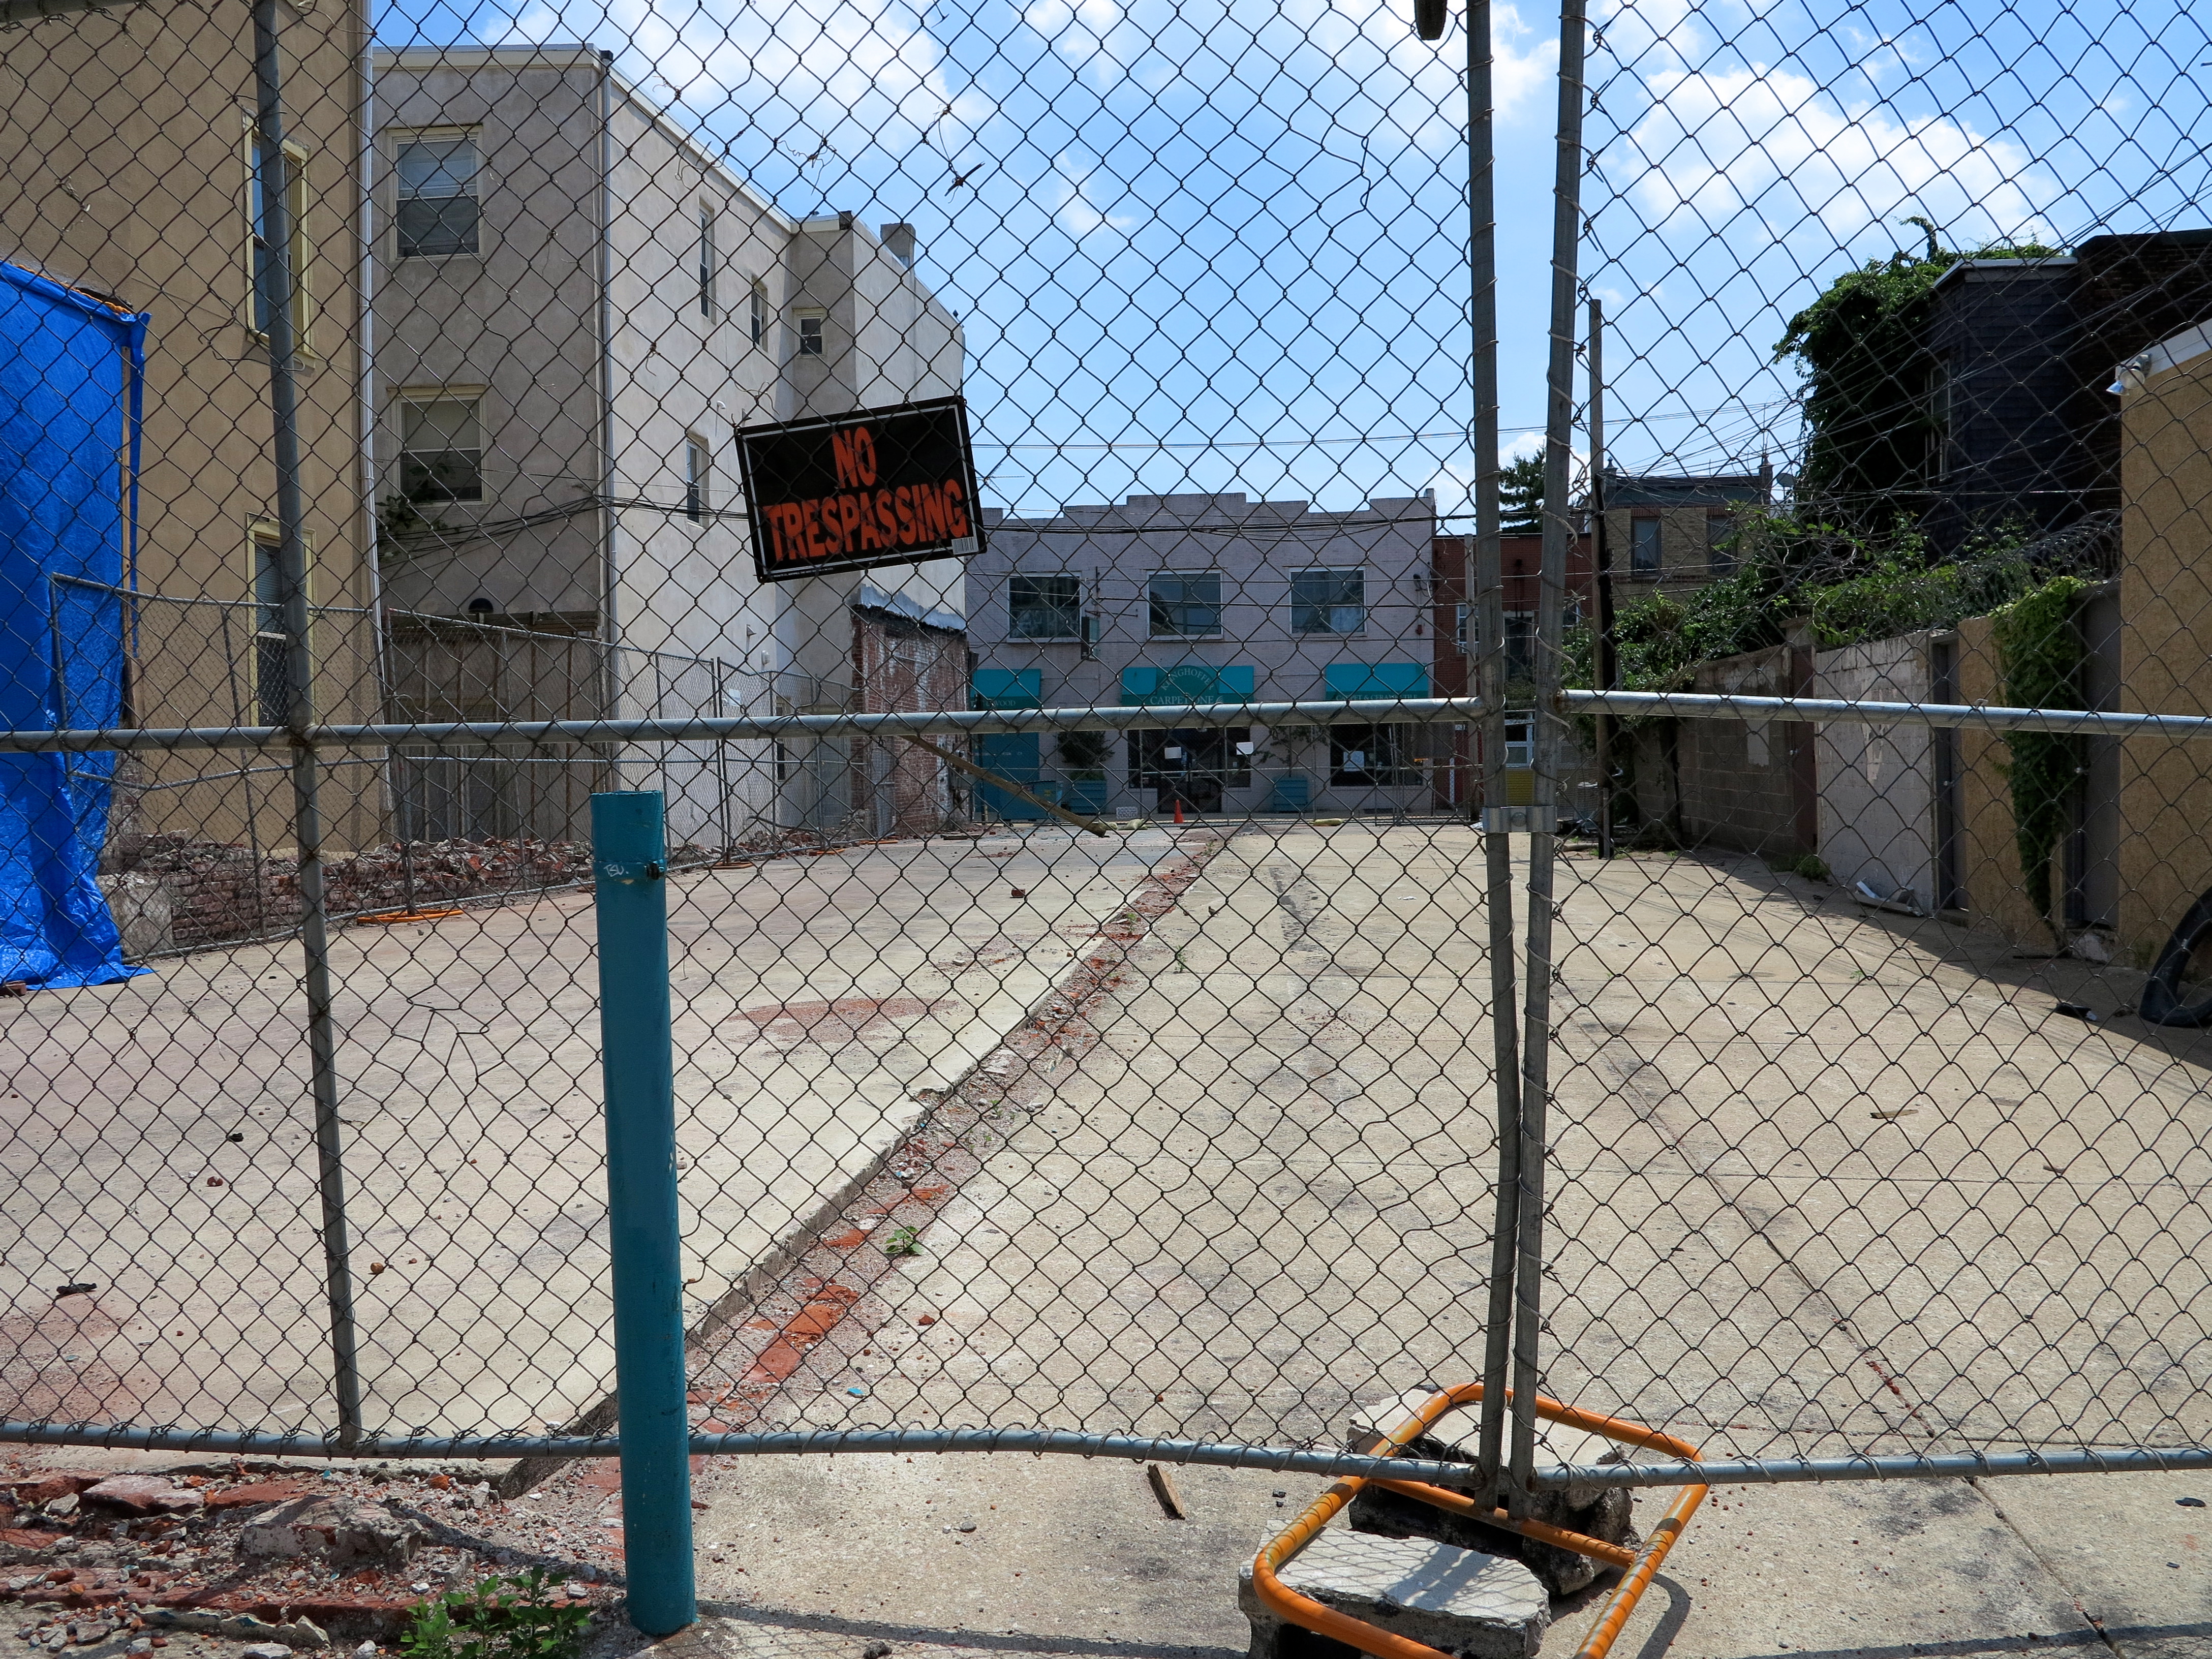 Cleared lot slated for garage-fronted rowhouses, 700 block of Kater looking toward Bainbridge